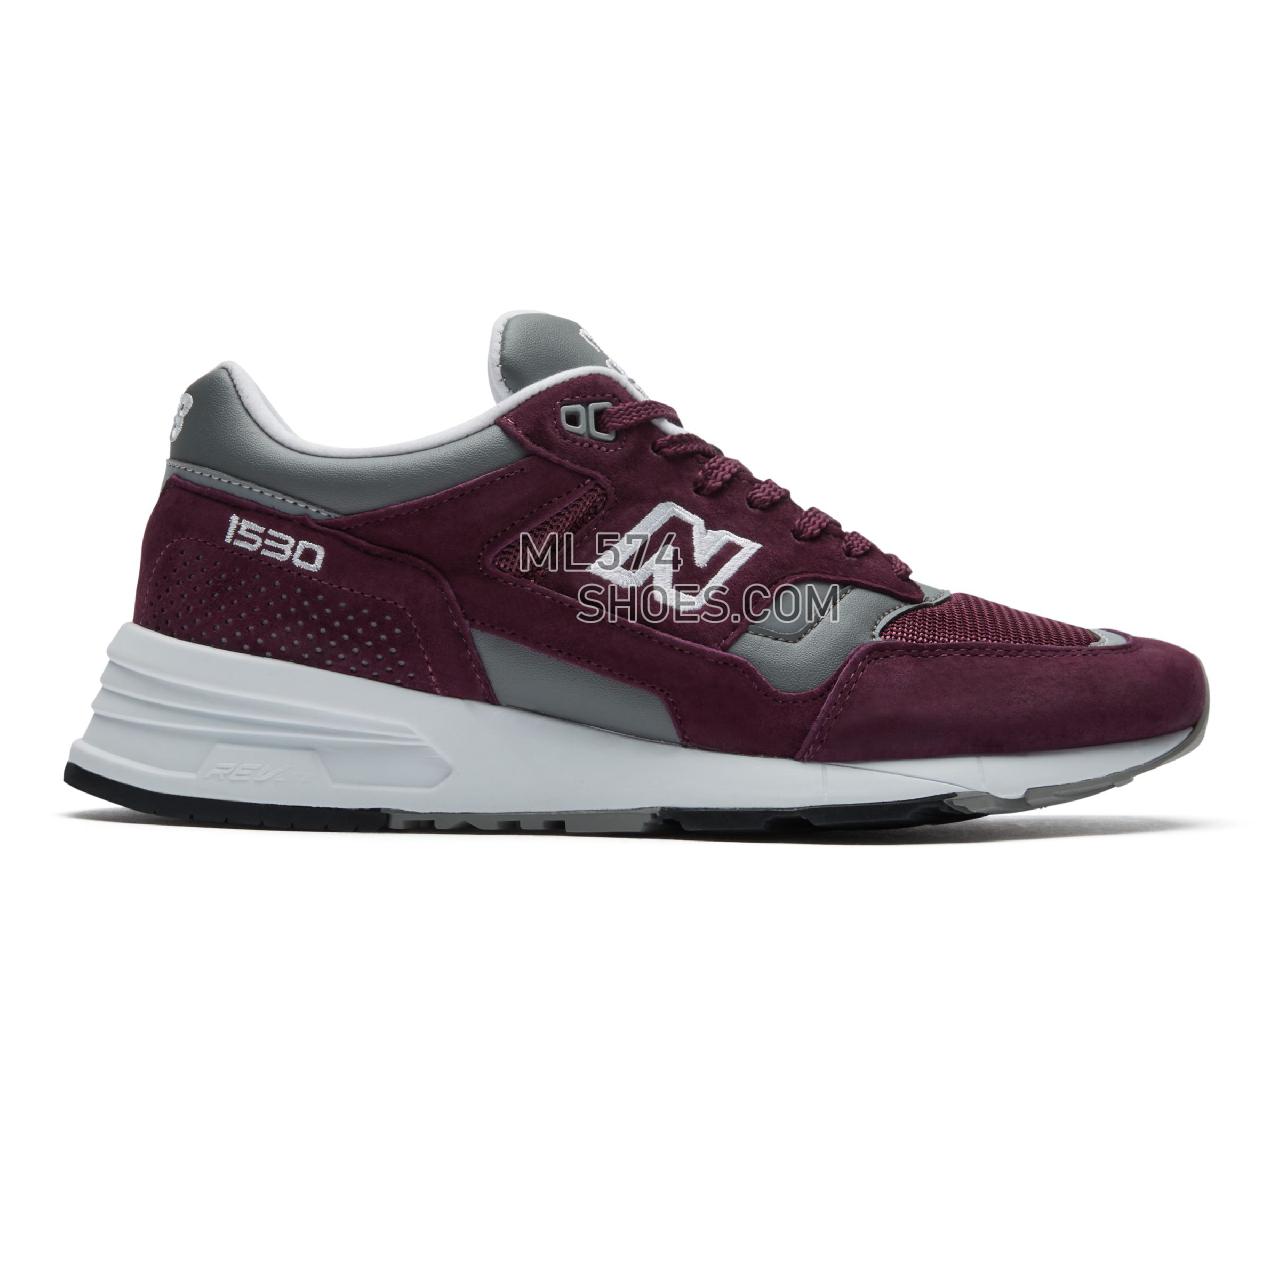 New Balance Made in UK 1530 - Men's Made in UK 1530 - Burgundy with Grey and White - M1530BUR